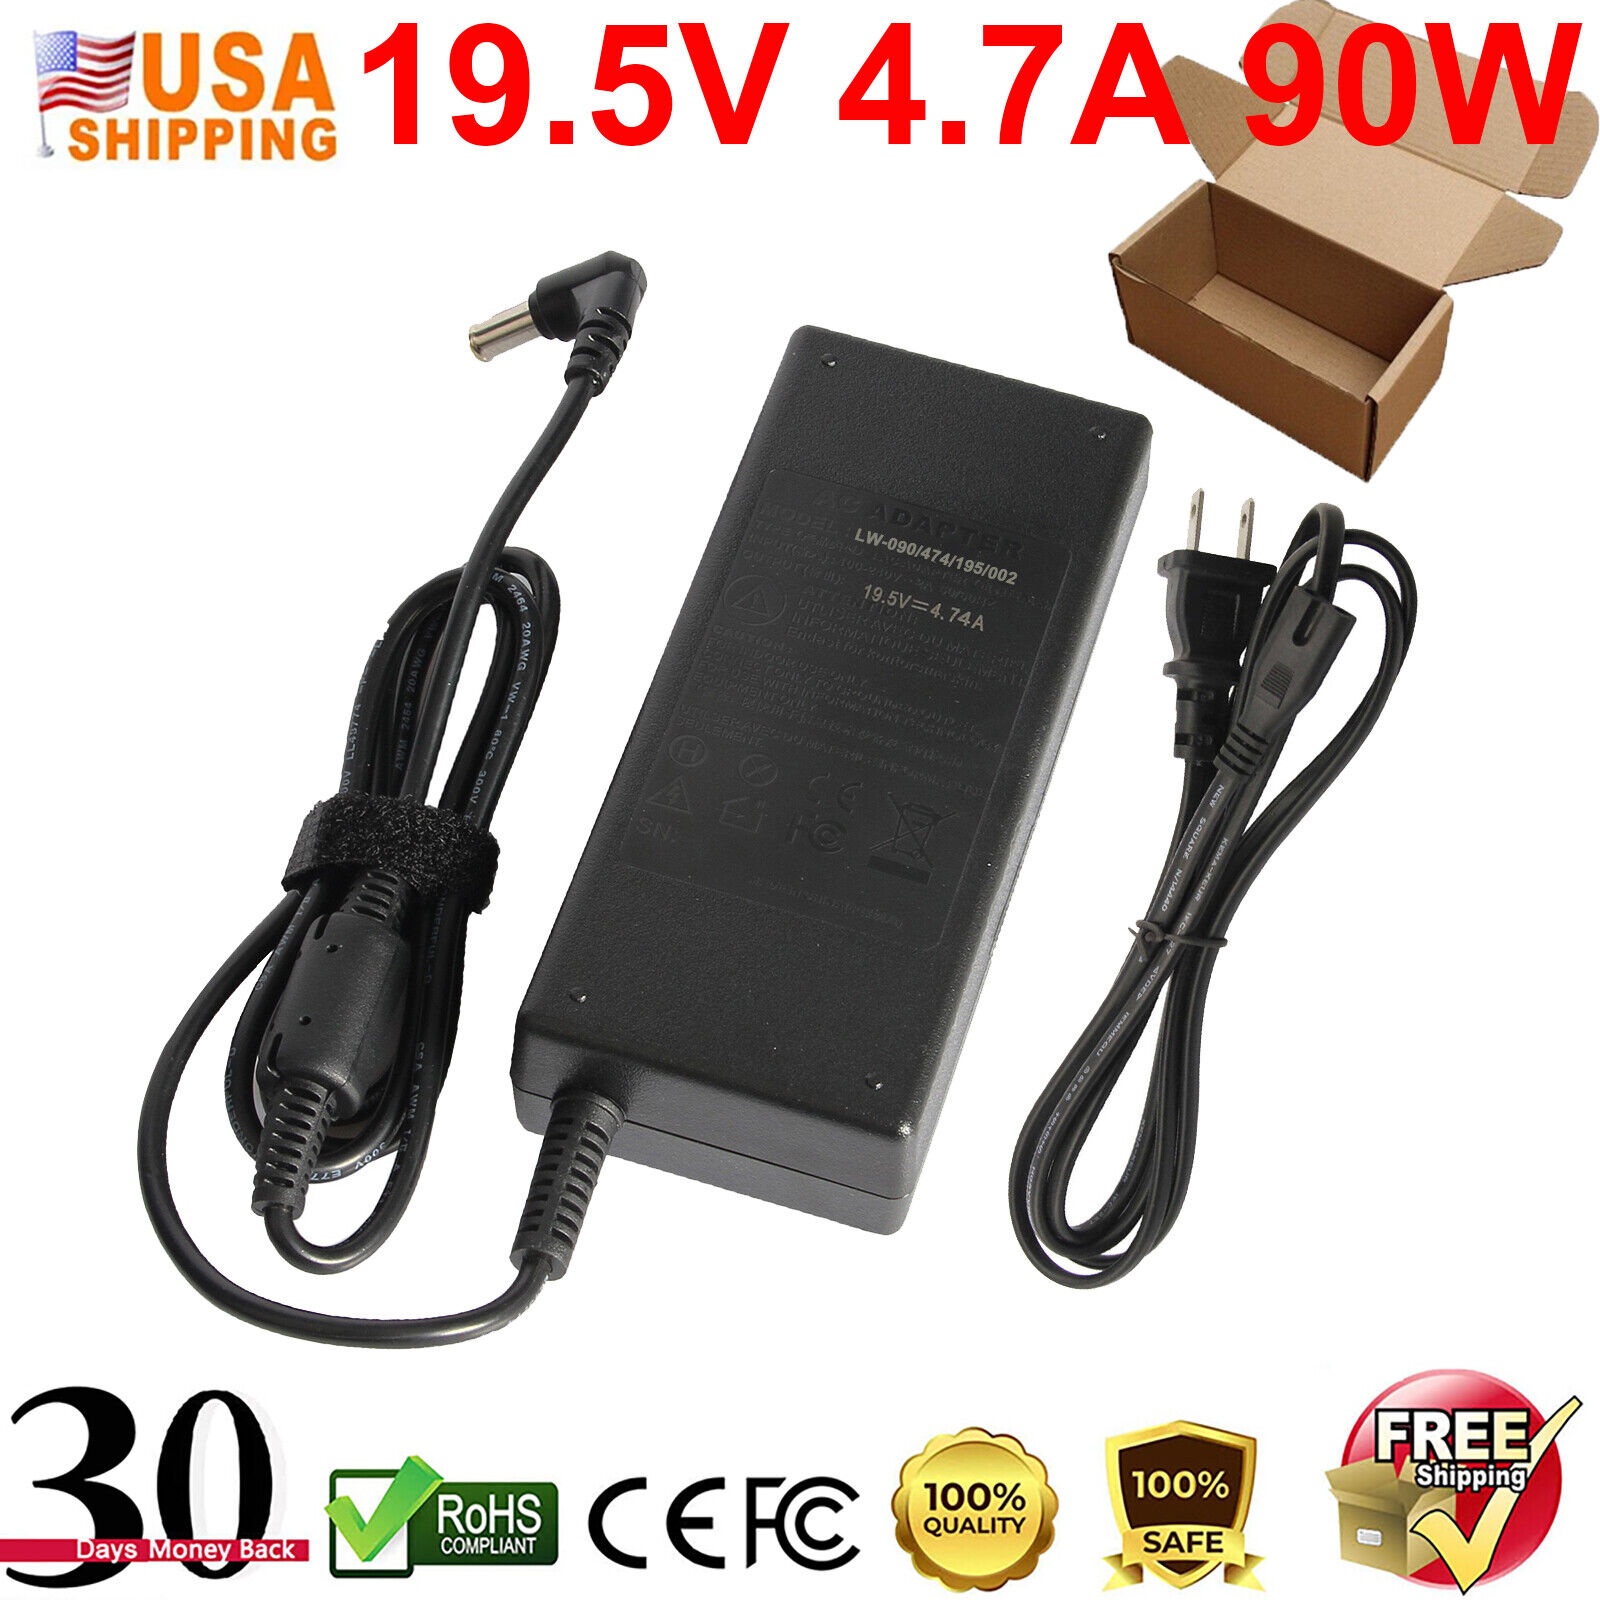 90W 19.5V 4.7A AC Adapter Charger for Sony Vaio Series Laptop Power Supply NEW